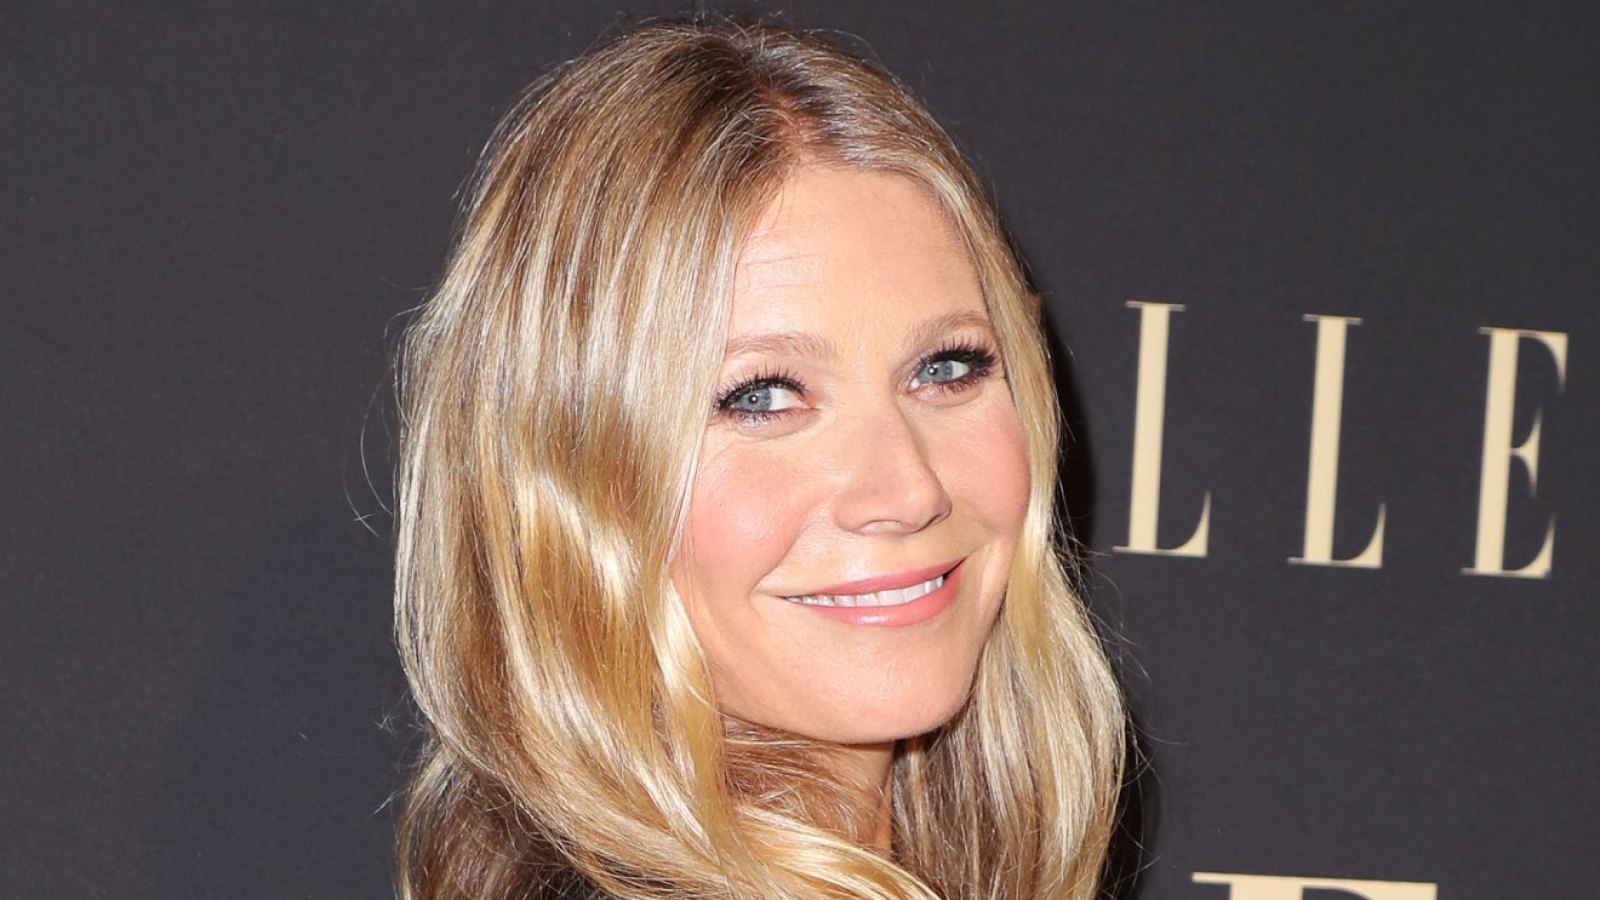 Gwyneth Paltrow’s Daughter Calls for ‘More Vagina Candles’ Amid Quarantine